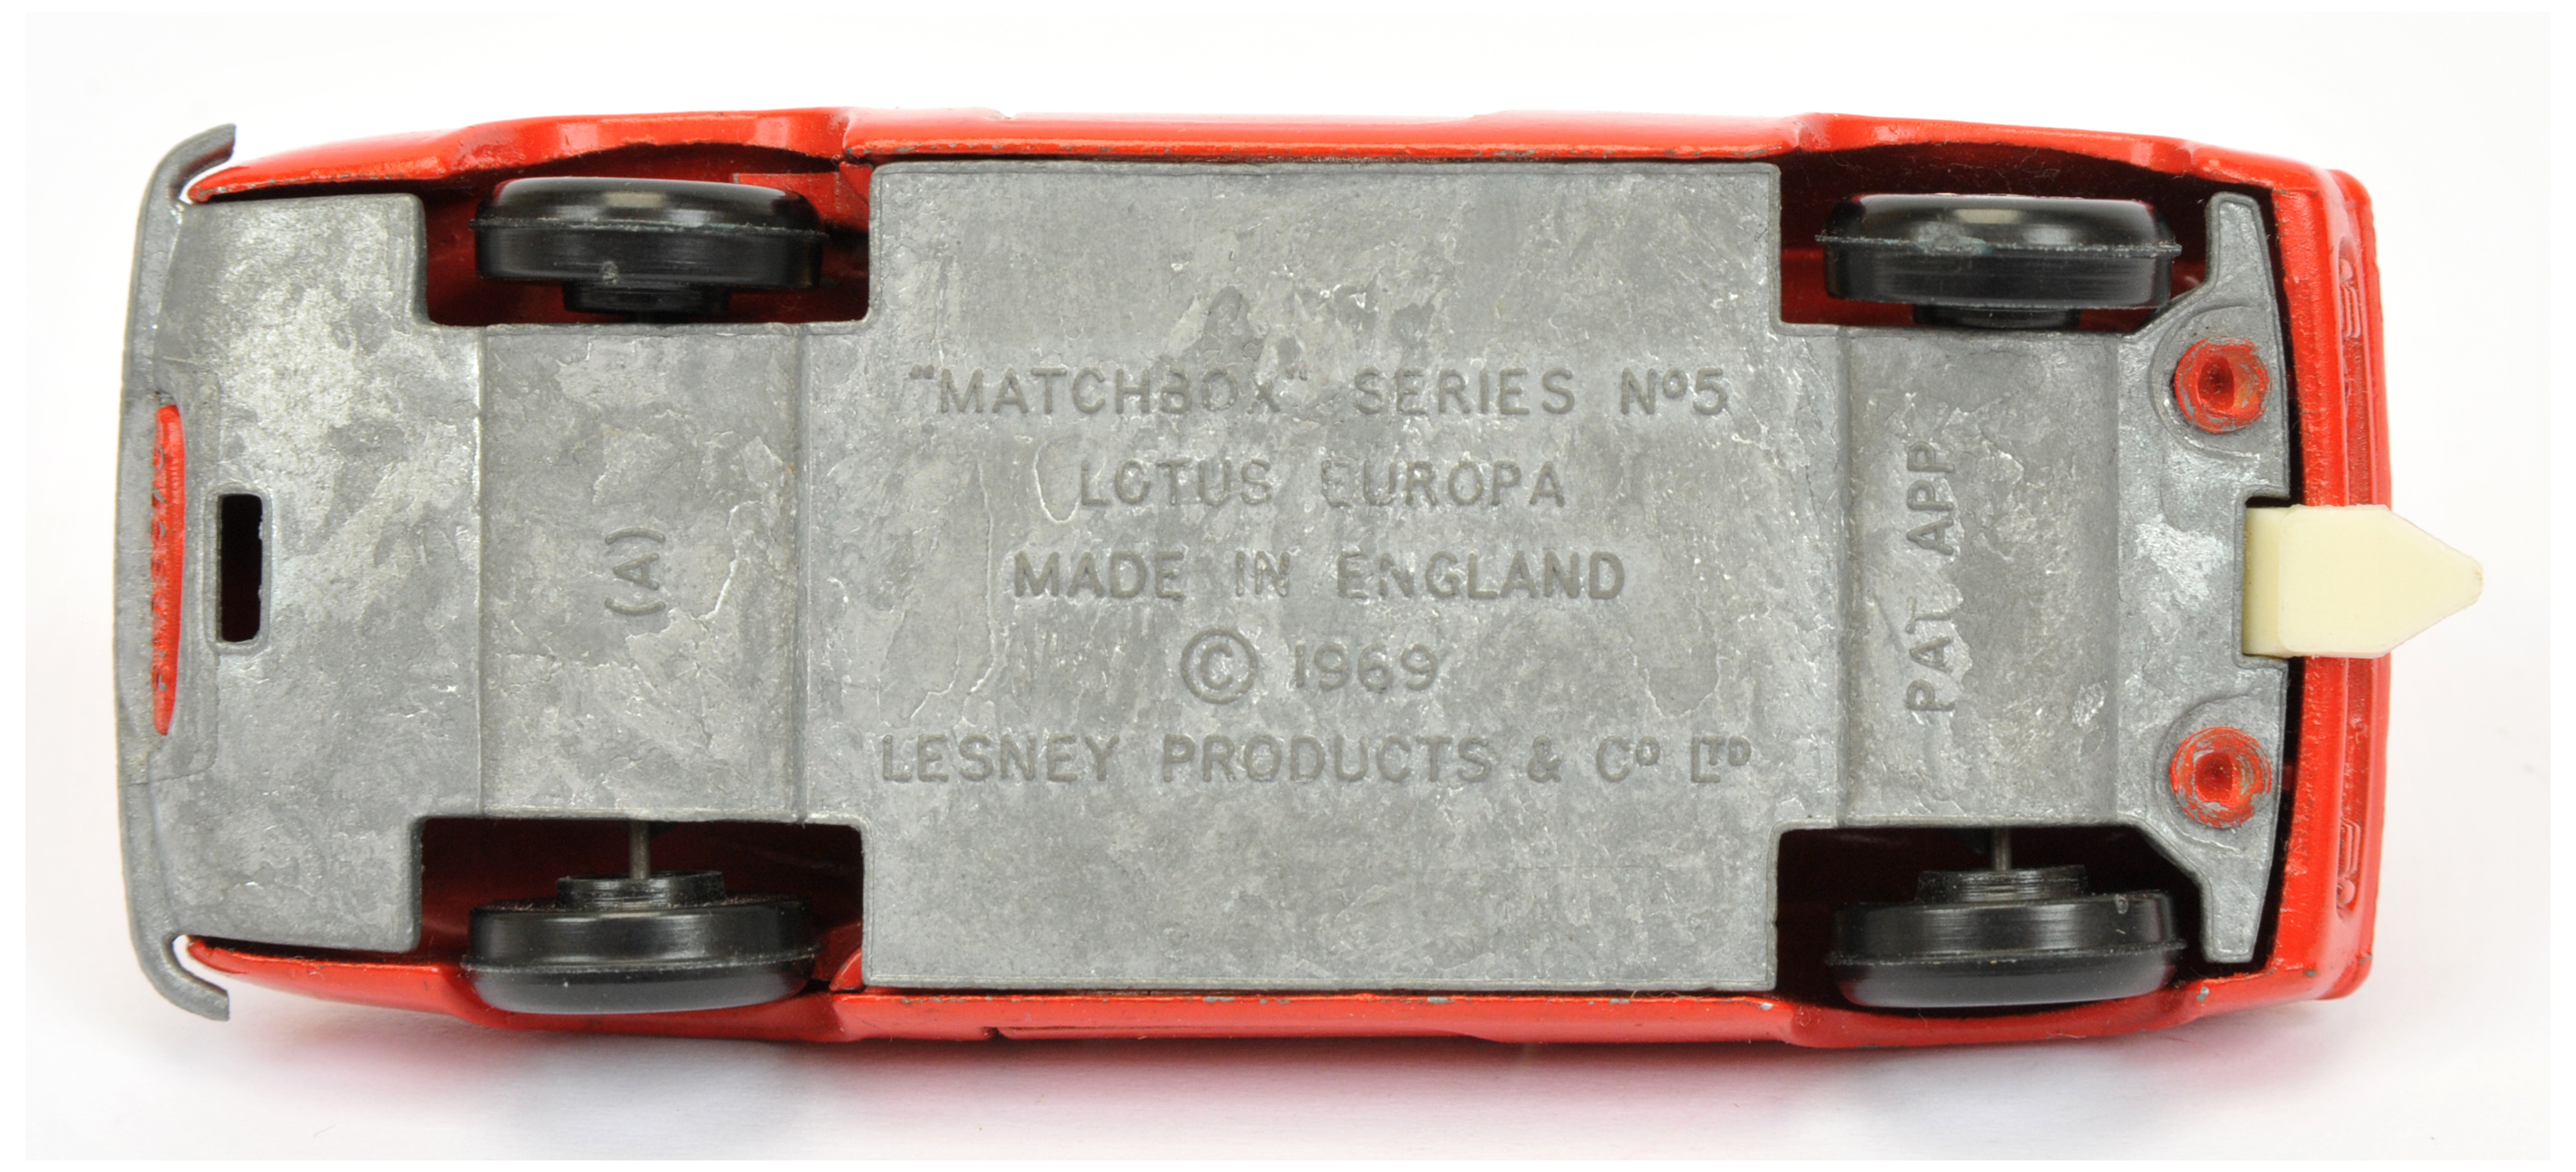 Matchbox Superfast No.5a Lotus Europa Pre-production factory colour trial model - brick red body,... - Image 3 of 3